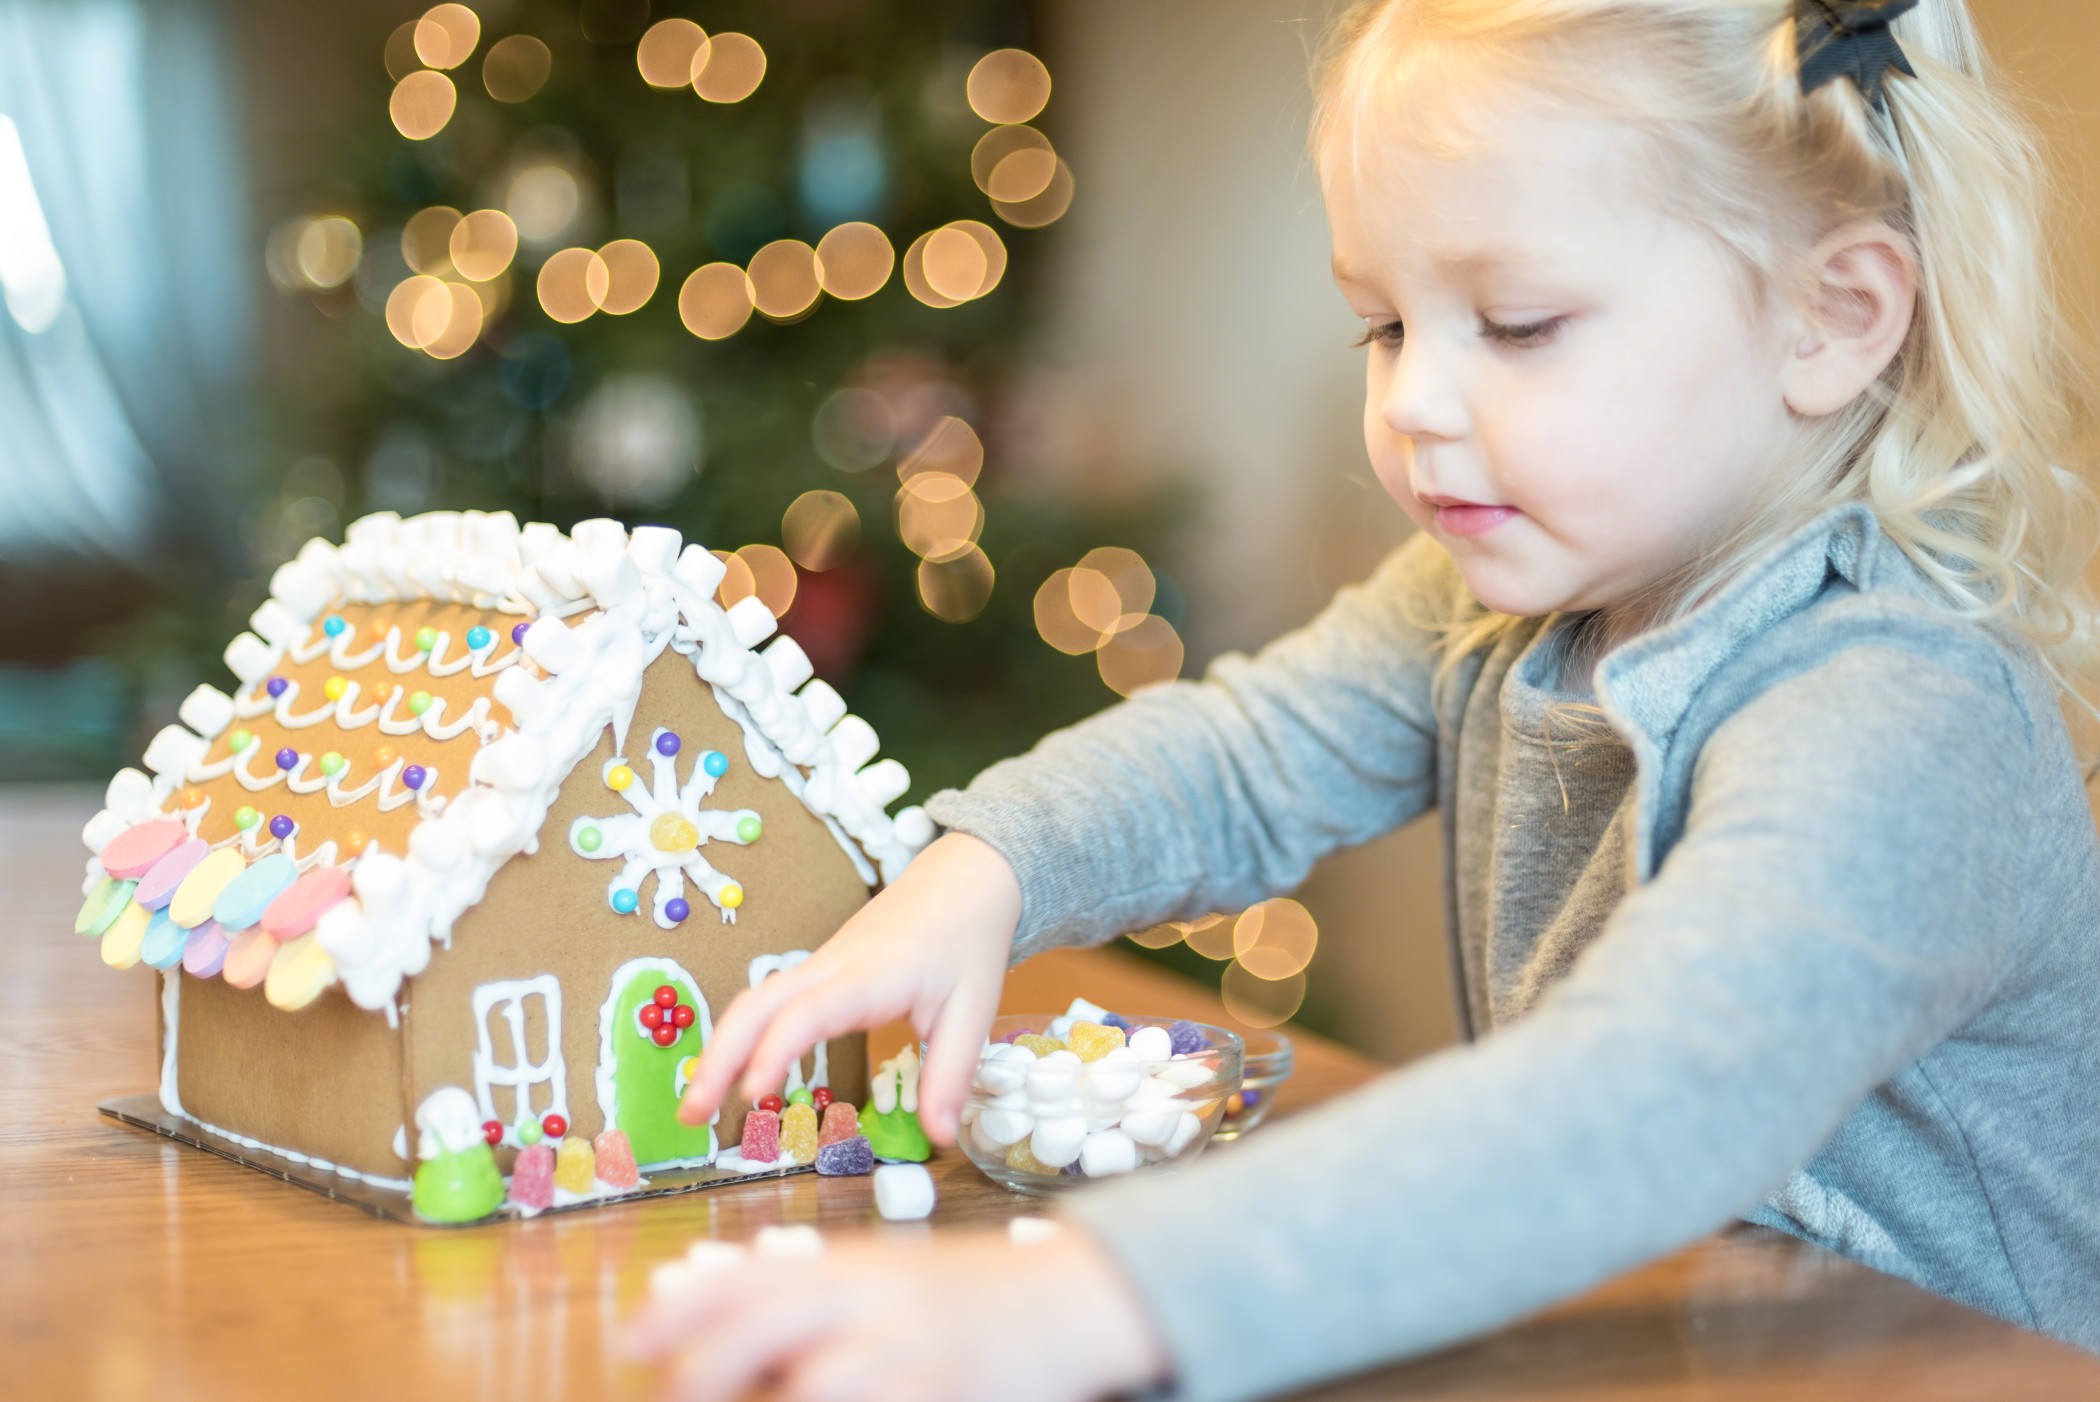 7 Christmas Activities to Do With the Little Ones Before the Big Day 8